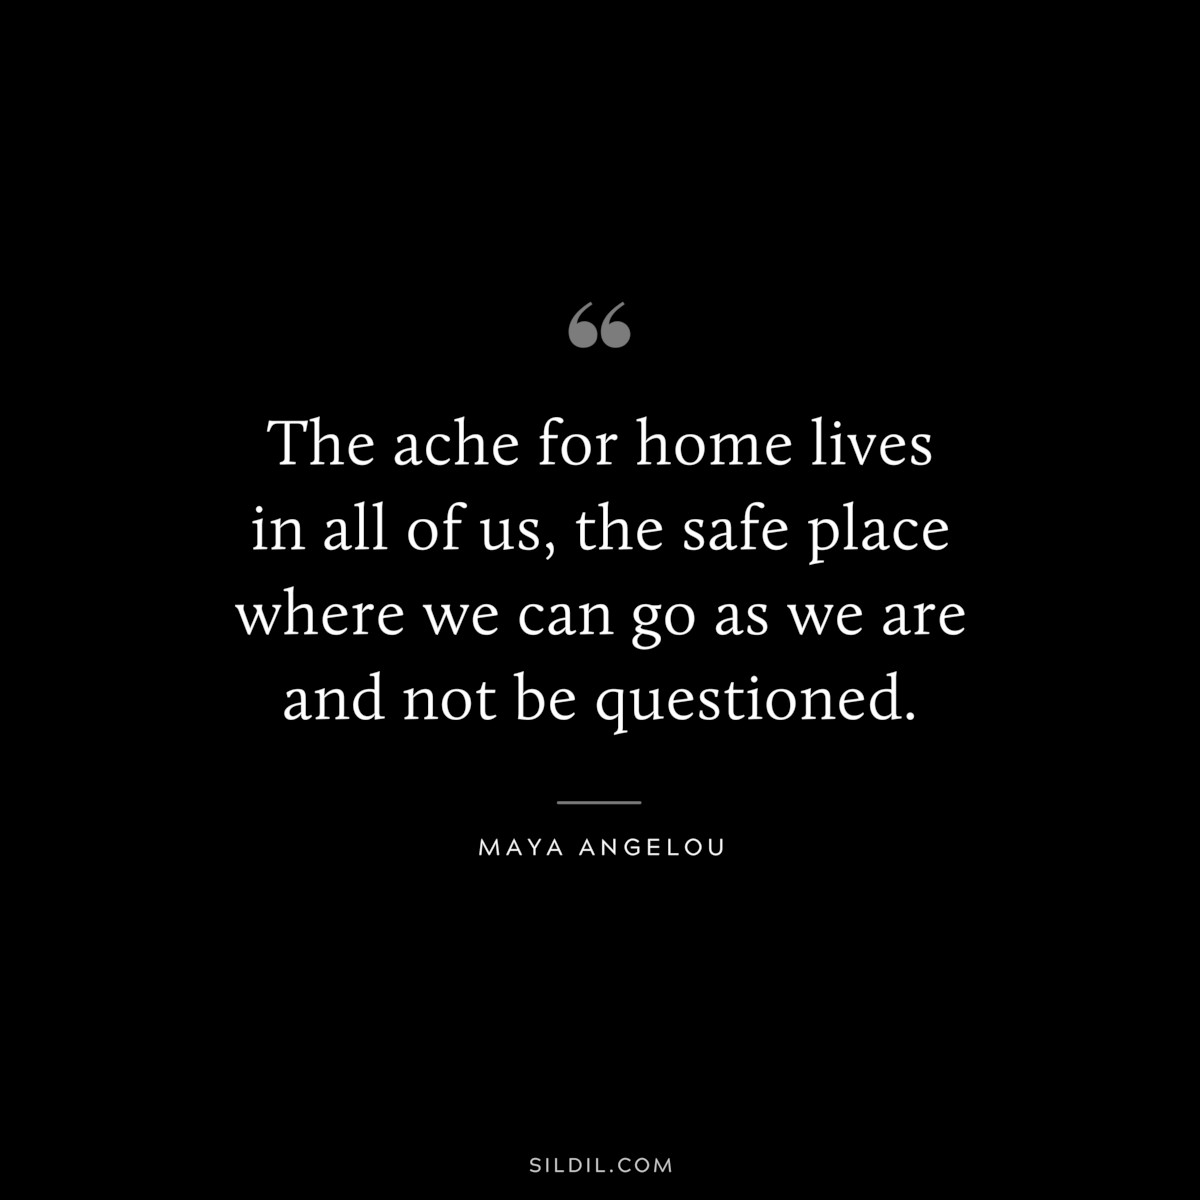 The ache for home lives in all of us, the safe place where we can go as we are and not be questioned. ― Maya Angelou